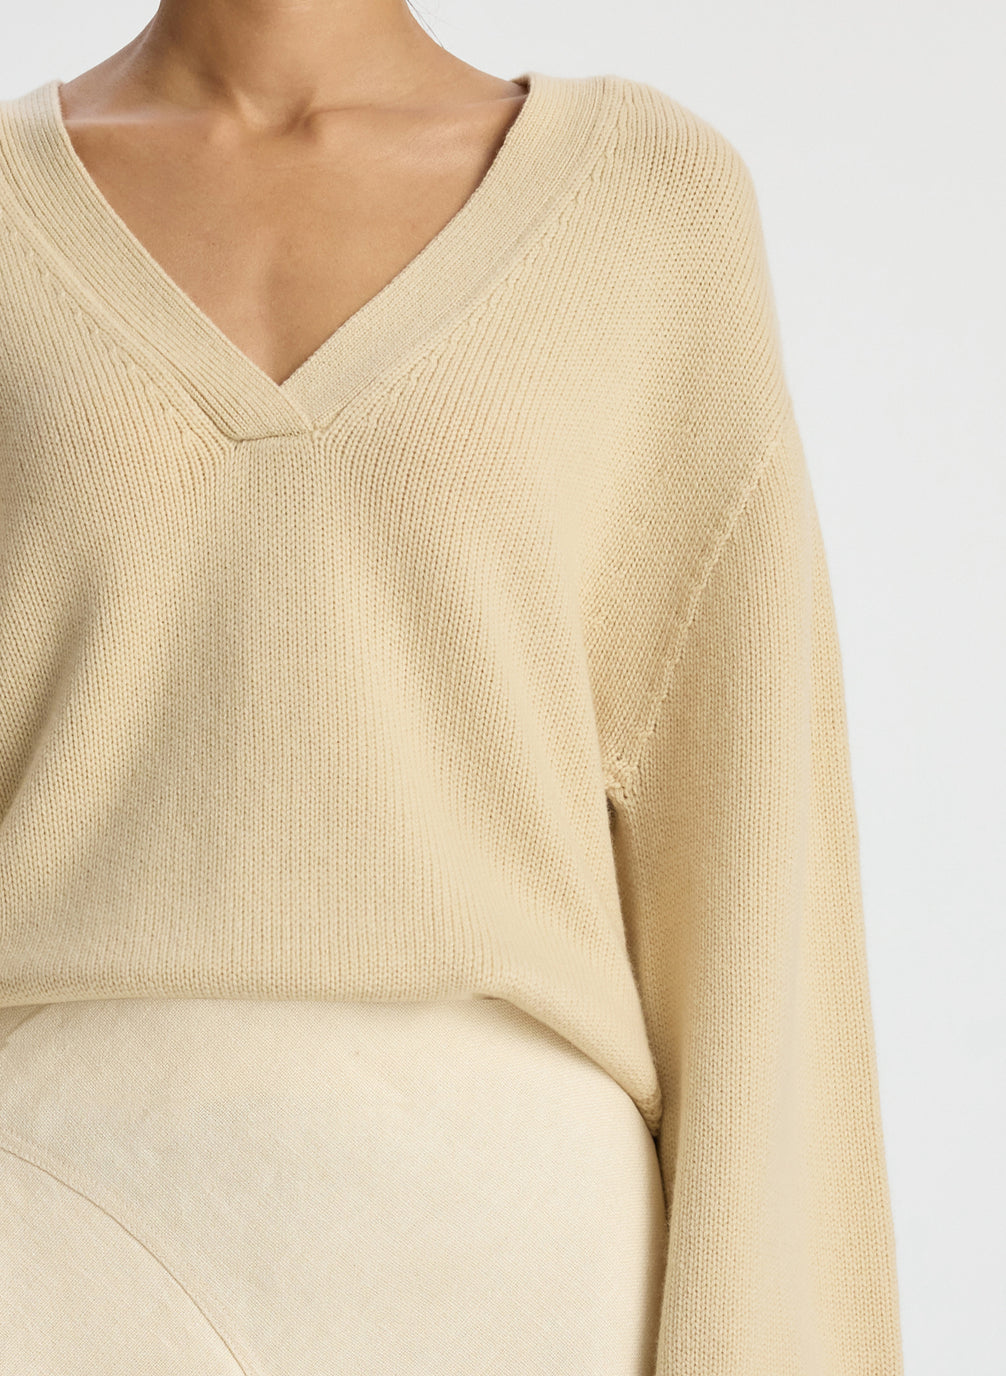 detail view of woman wearing beige v neck sweater and cream skirt